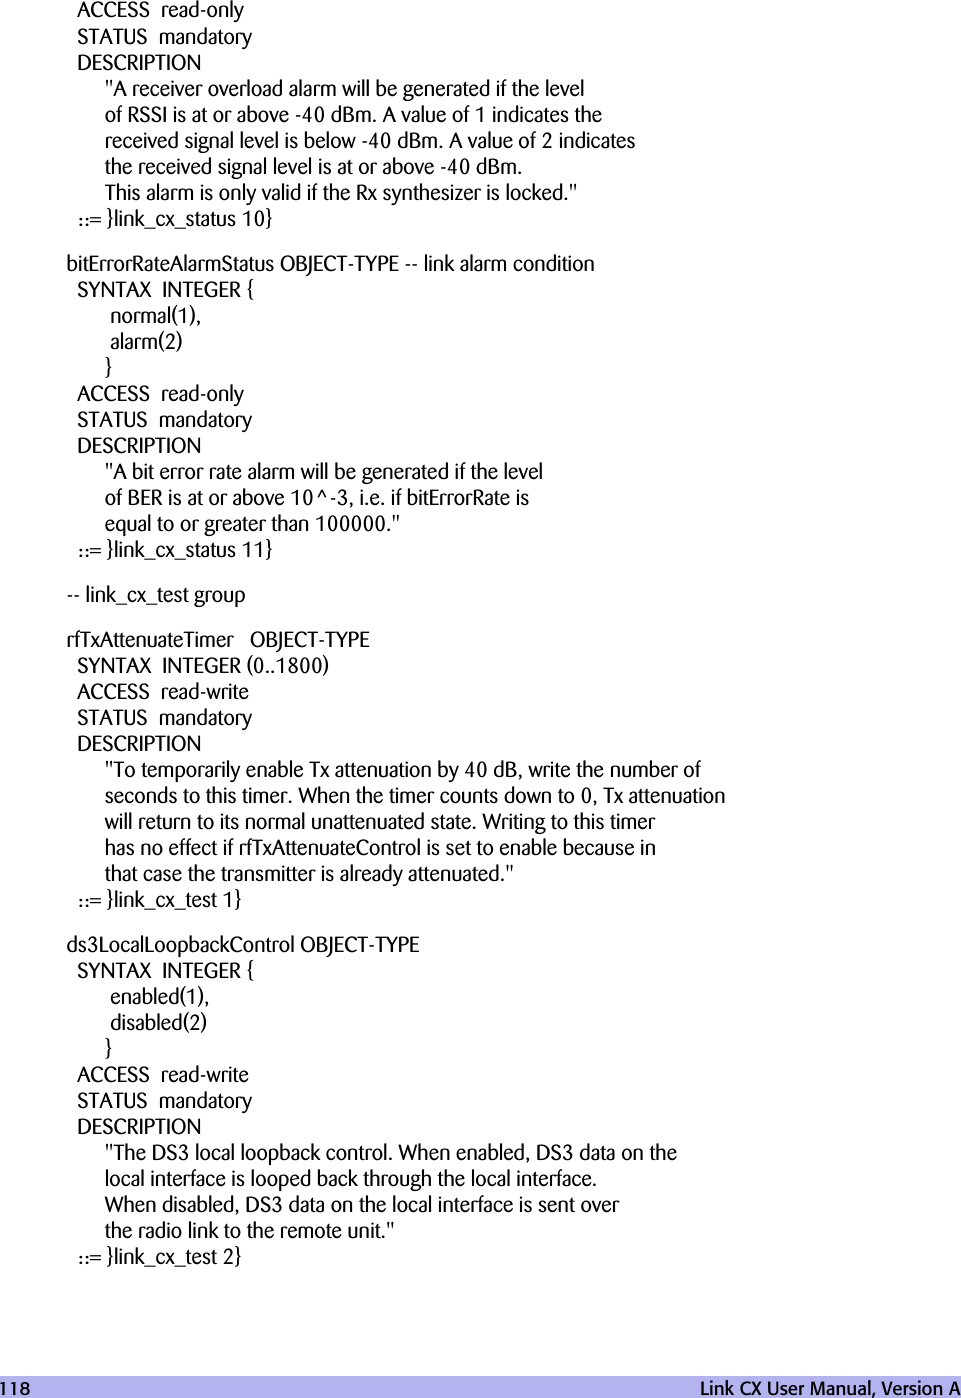 118   Link CX User Manual, Version AACCESS read-onlySTATUS mandatoryDESCRIPTION&quot;A receiver overload alarm will be generated if the levelof RSSI is at or above -40 dBm. A value of 1 indicates thereceived signal level is below -40 dBm. A value of 2 indicatesthe received signal level is at or above -40 dBm.This alarm is only valid if the Rx synthesizer is locked.&quot;::= }link_cx_status 10}bitErrorRateAlarmStatus OBJECT-TYPE -- link alarm conditionSYNTAX INTEGER { normal(1), alarm(2)}ACCESS read-onlySTATUS mandatoryDESCRIPTION&quot;A bit error rate alarm will be generated if the levelof BER is at or above 10^-3, i.e. if bitErrorRate isequal to or greater than 100000.&quot;::= }link_cx_status 11}-- link_cx_test grouprfTxAttenuateTimer OBJECT-TYPESYNTAX INTEGER (0..1800)ACCESS read-writeSTATUS mandatoryDESCRIPTION&quot;To temporarily enable Tx attenuation by 40 dB, write the number ofseconds to this timer. When the timer counts down to 0, Tx attenuationwill return to its normal unattenuated state. Writing to this timerhas no effect if rfTxAttenuateControl is set to enable because inthat case the transmitter is already attenuated.&quot;::= }link_cx_test 1}ds3LocalLoopbackControl OBJECT-TYPESYNTAX INTEGER { enabled(1), disabled(2)}ACCESS read-writeSTATUS mandatoryDESCRIPTION&quot;The DS3 local loopback control. When enabled, DS3 data on thelocal interface is looped back through the local interface.When disabled, DS3 data on the local interface is sent overthe radio link to the remote unit.&quot;::= }link_cx_test 2}